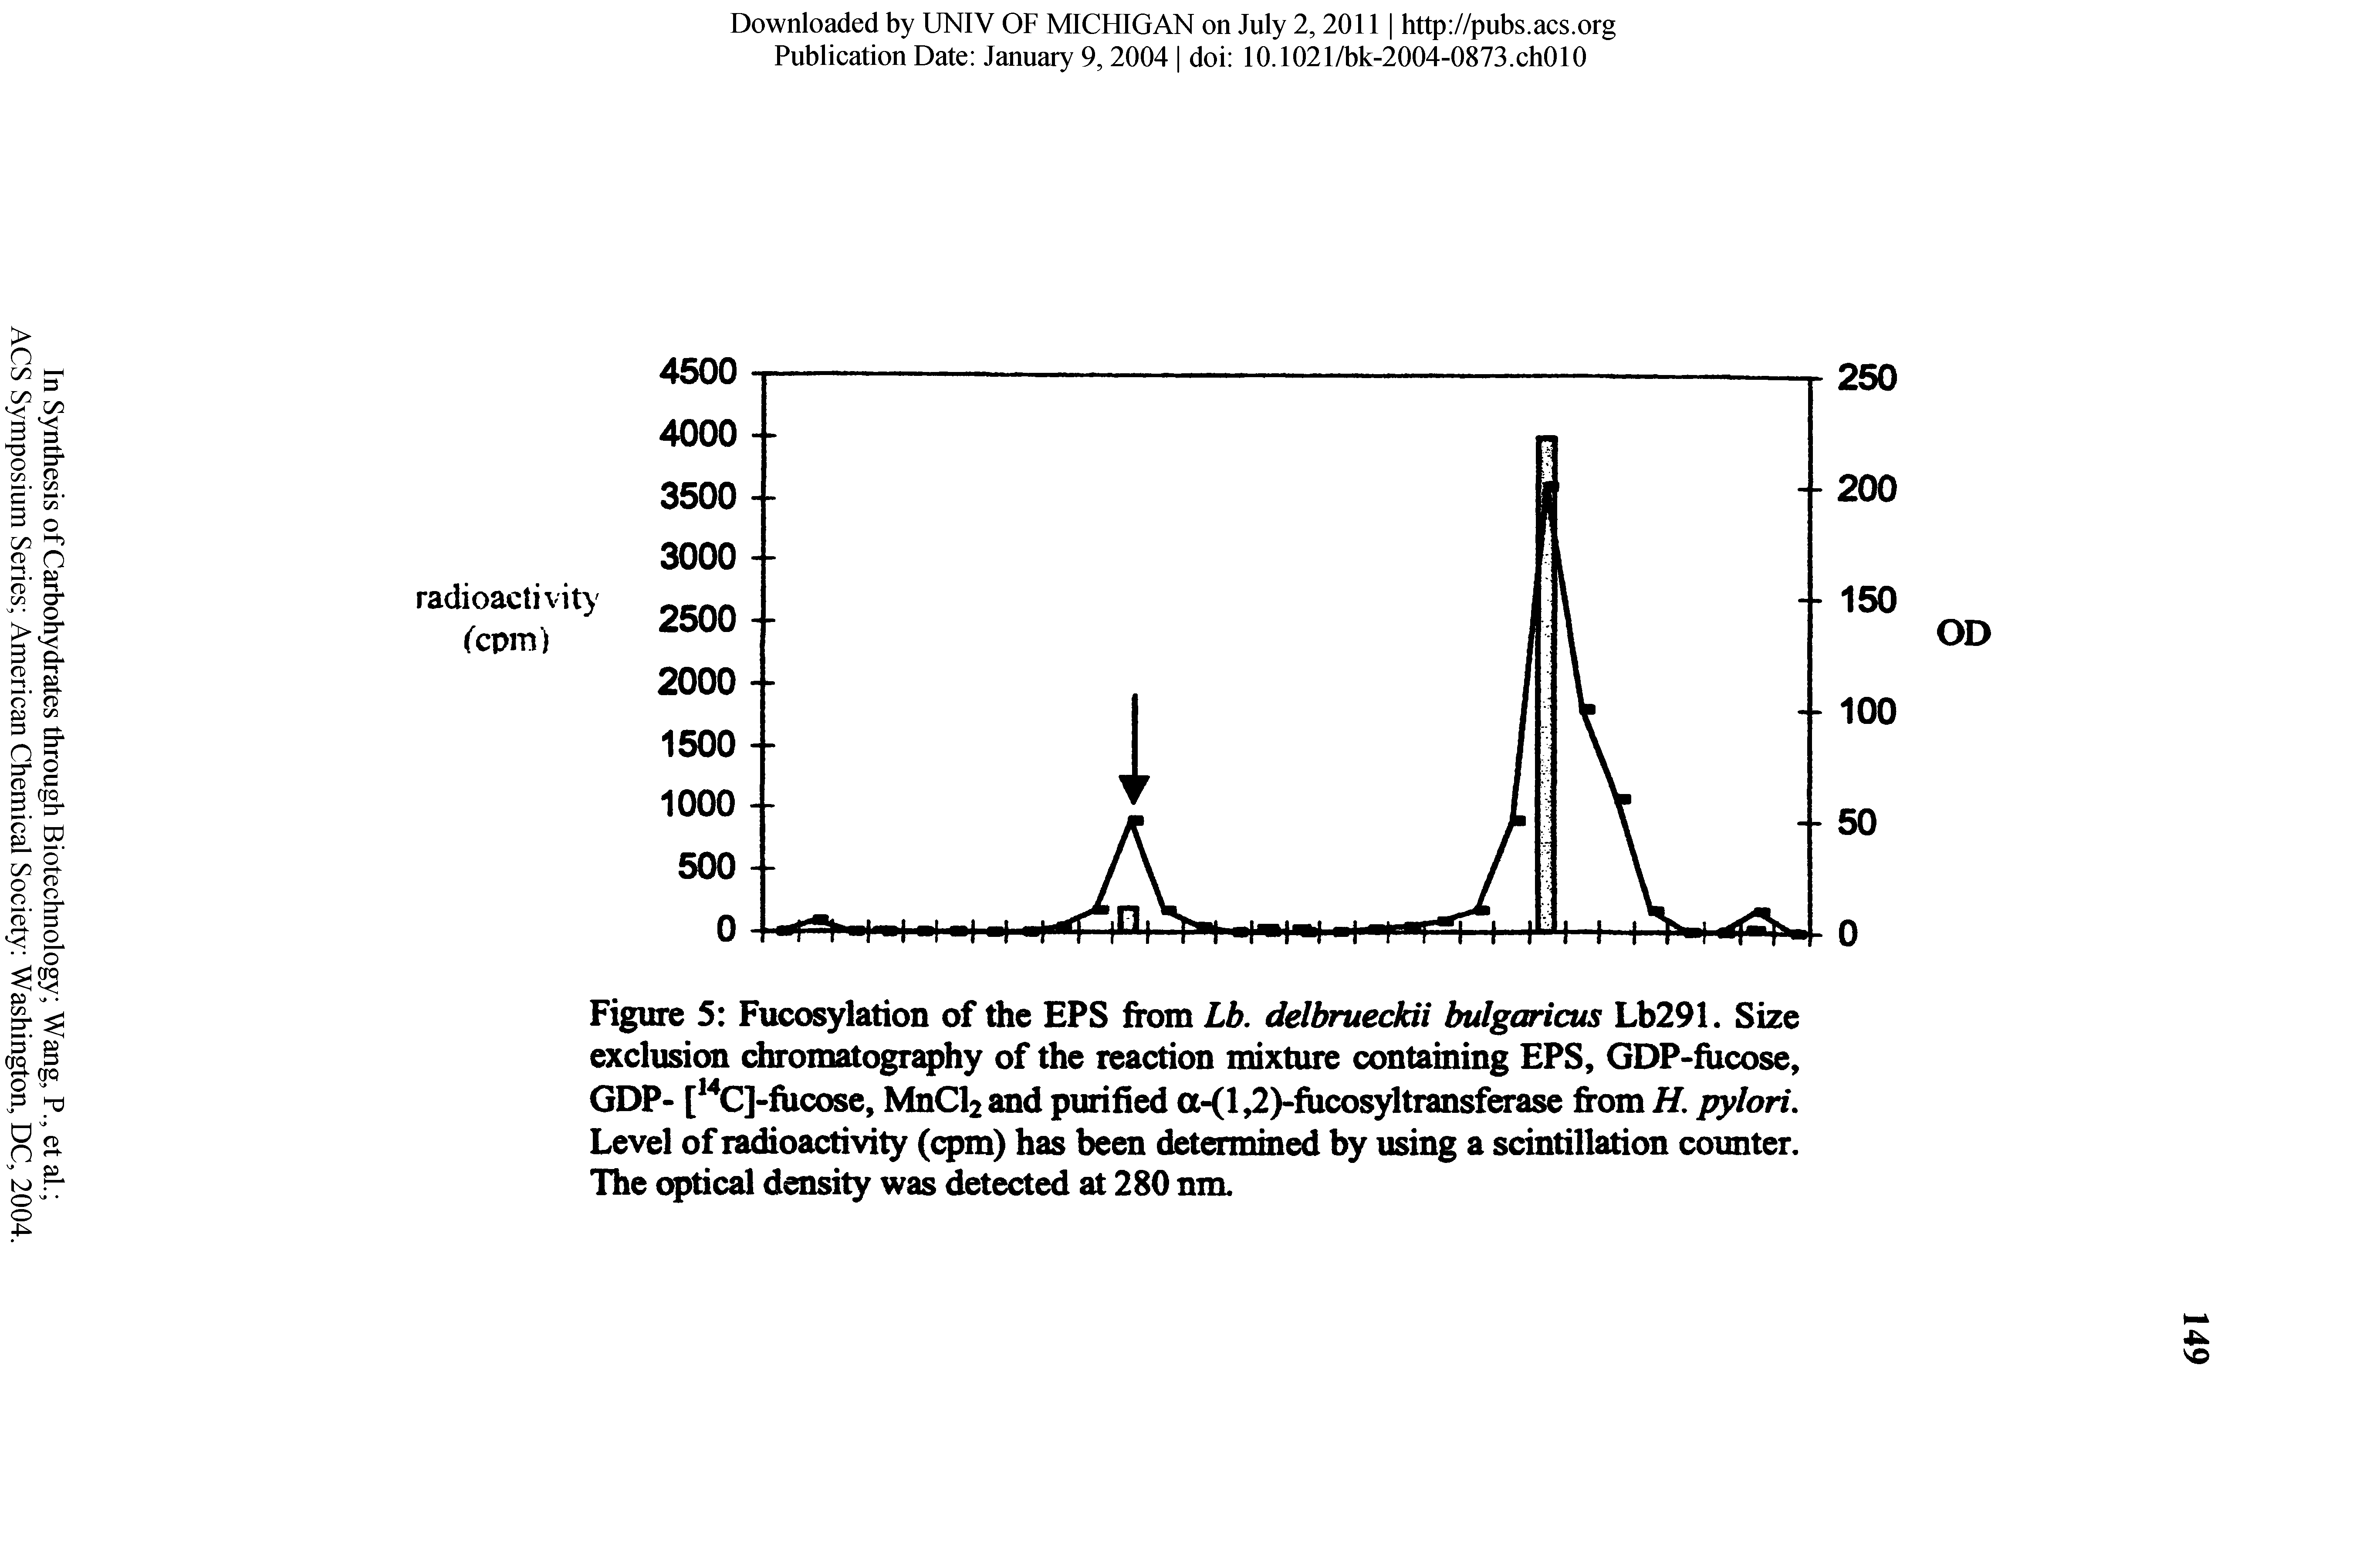 Figure 5 Fucosylation of the EPS from Lb. delbrueddi bulgaricus Lb291. Size exclusion chromatography of the reaction mixture containing EPS, GDP-fiicose, GDP- [ C]-fucose, MnCl2 and purified a-(l,2)-fucosyltransferase from H. pylori. Level of radioactivity (cpm) has been determined by using a scintillation counter. The optical density was detected at 280 nm.